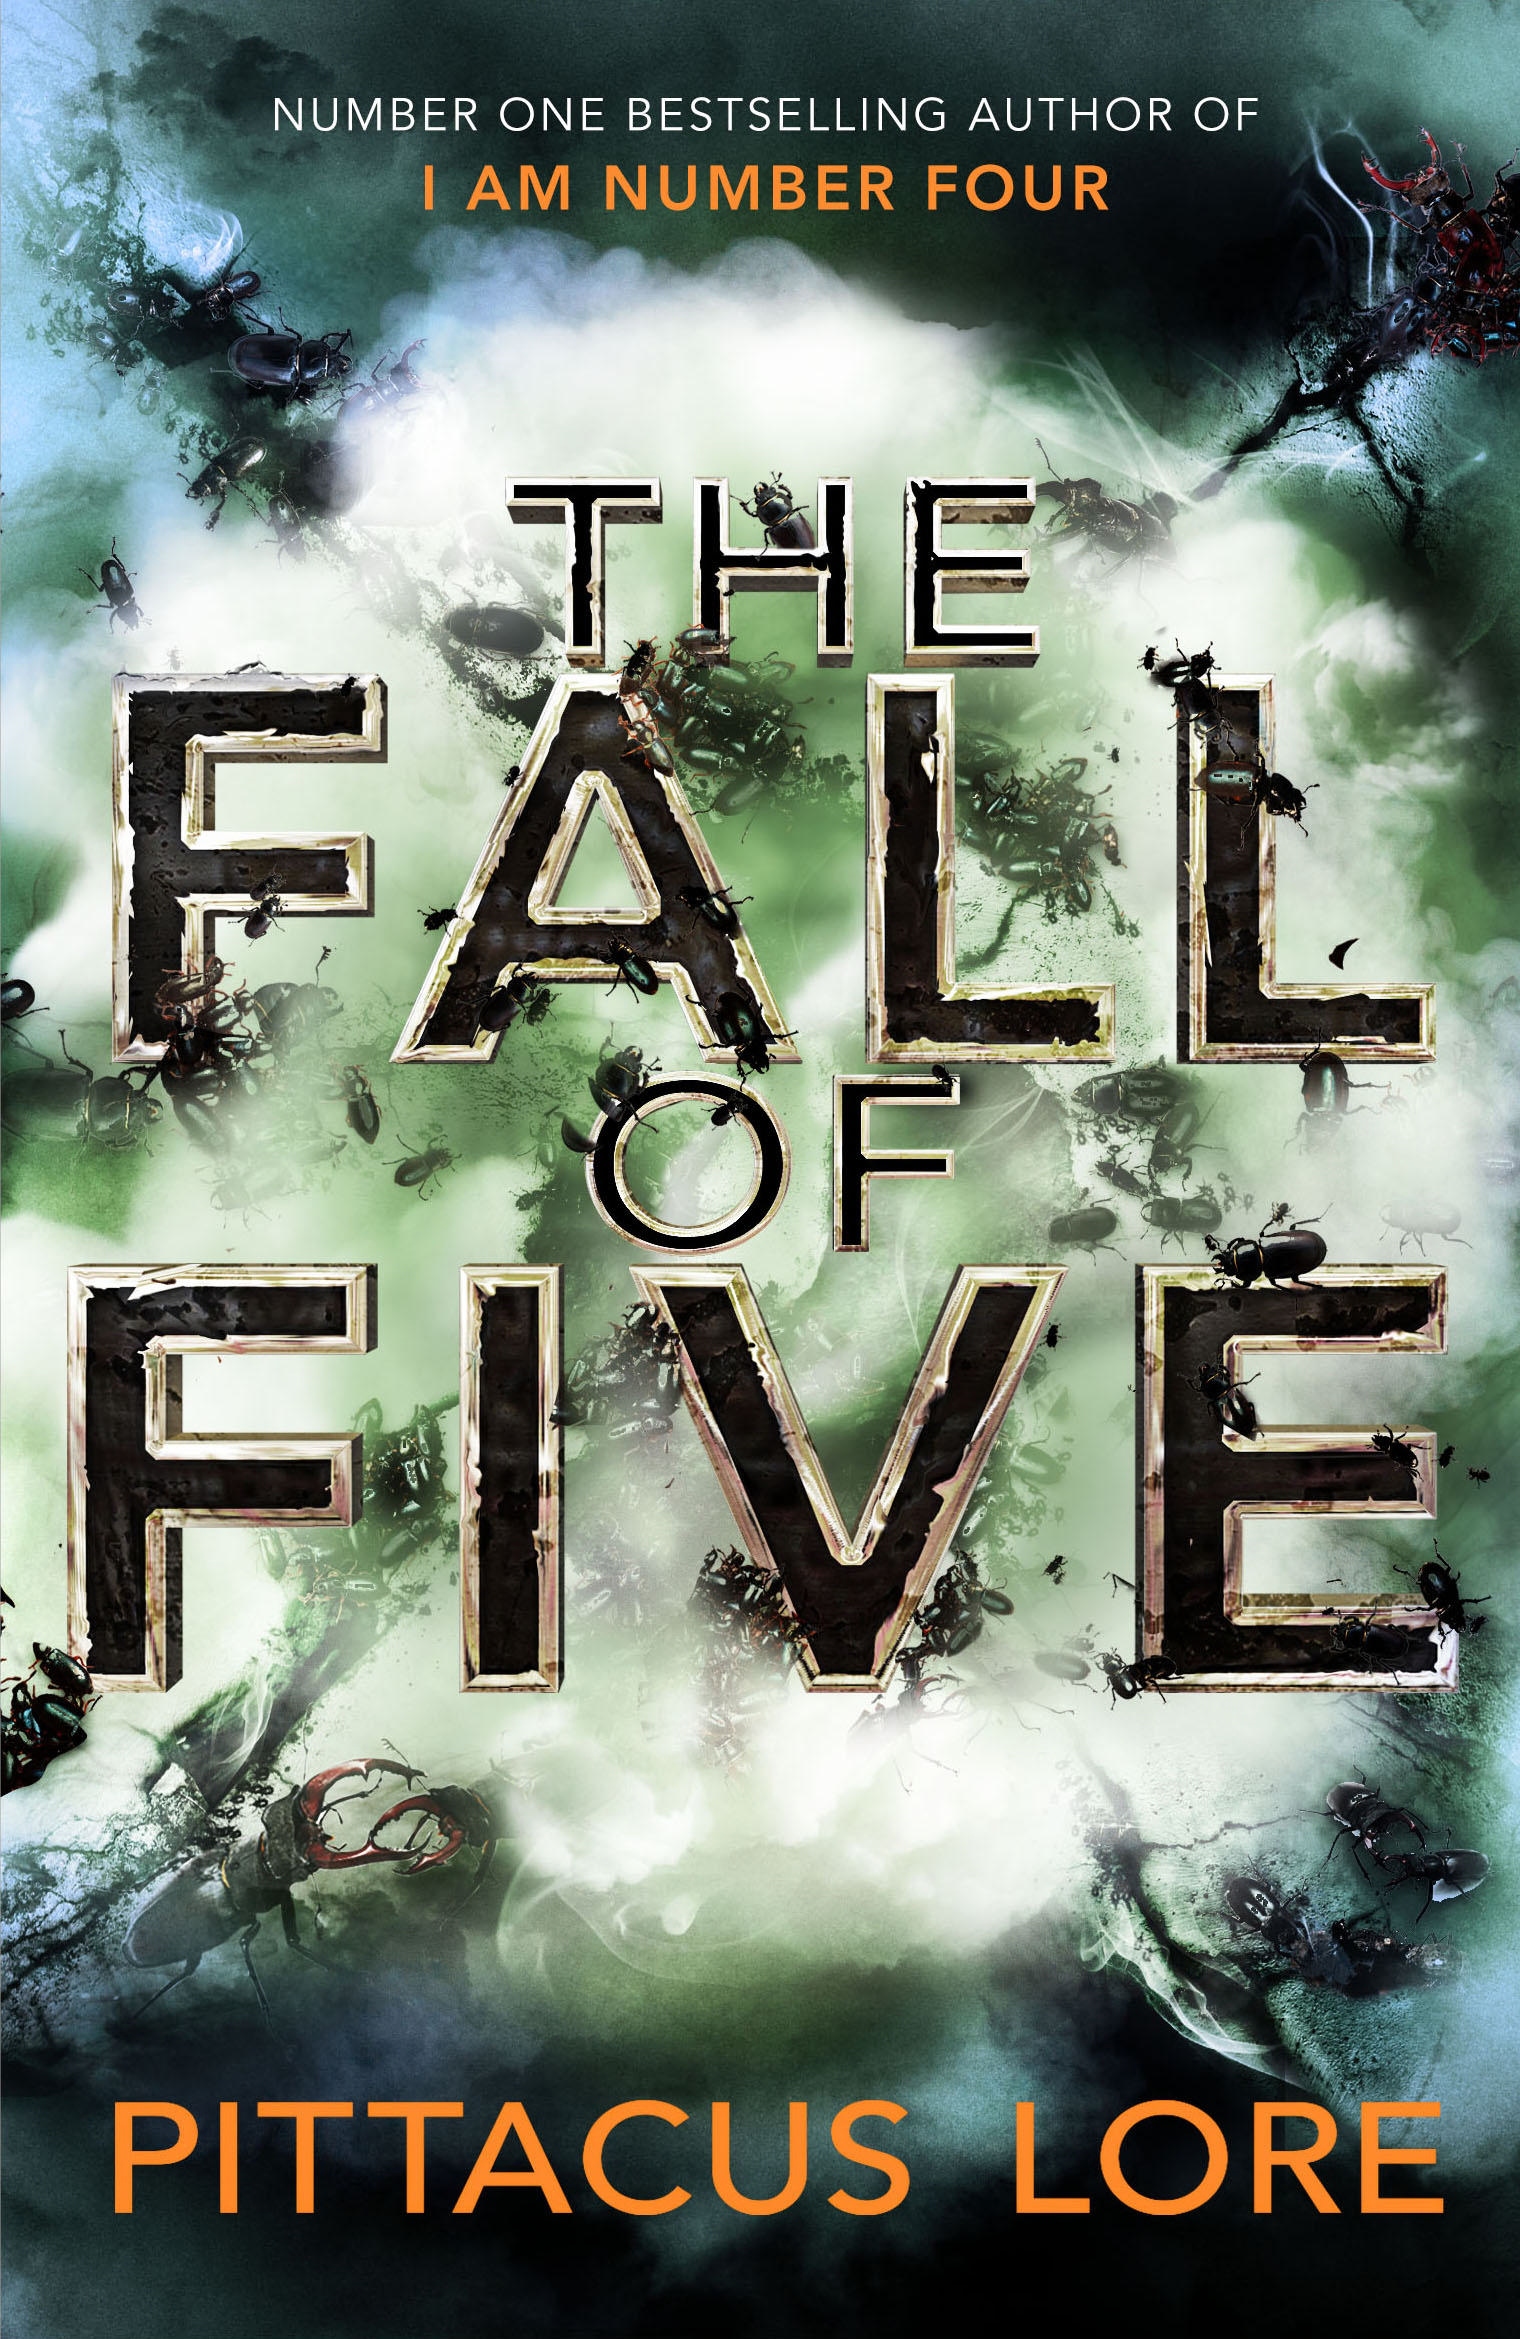 Publisher Penguin - The Fall of Five(Lorien Legacies Book 4) - Pittacus Lore